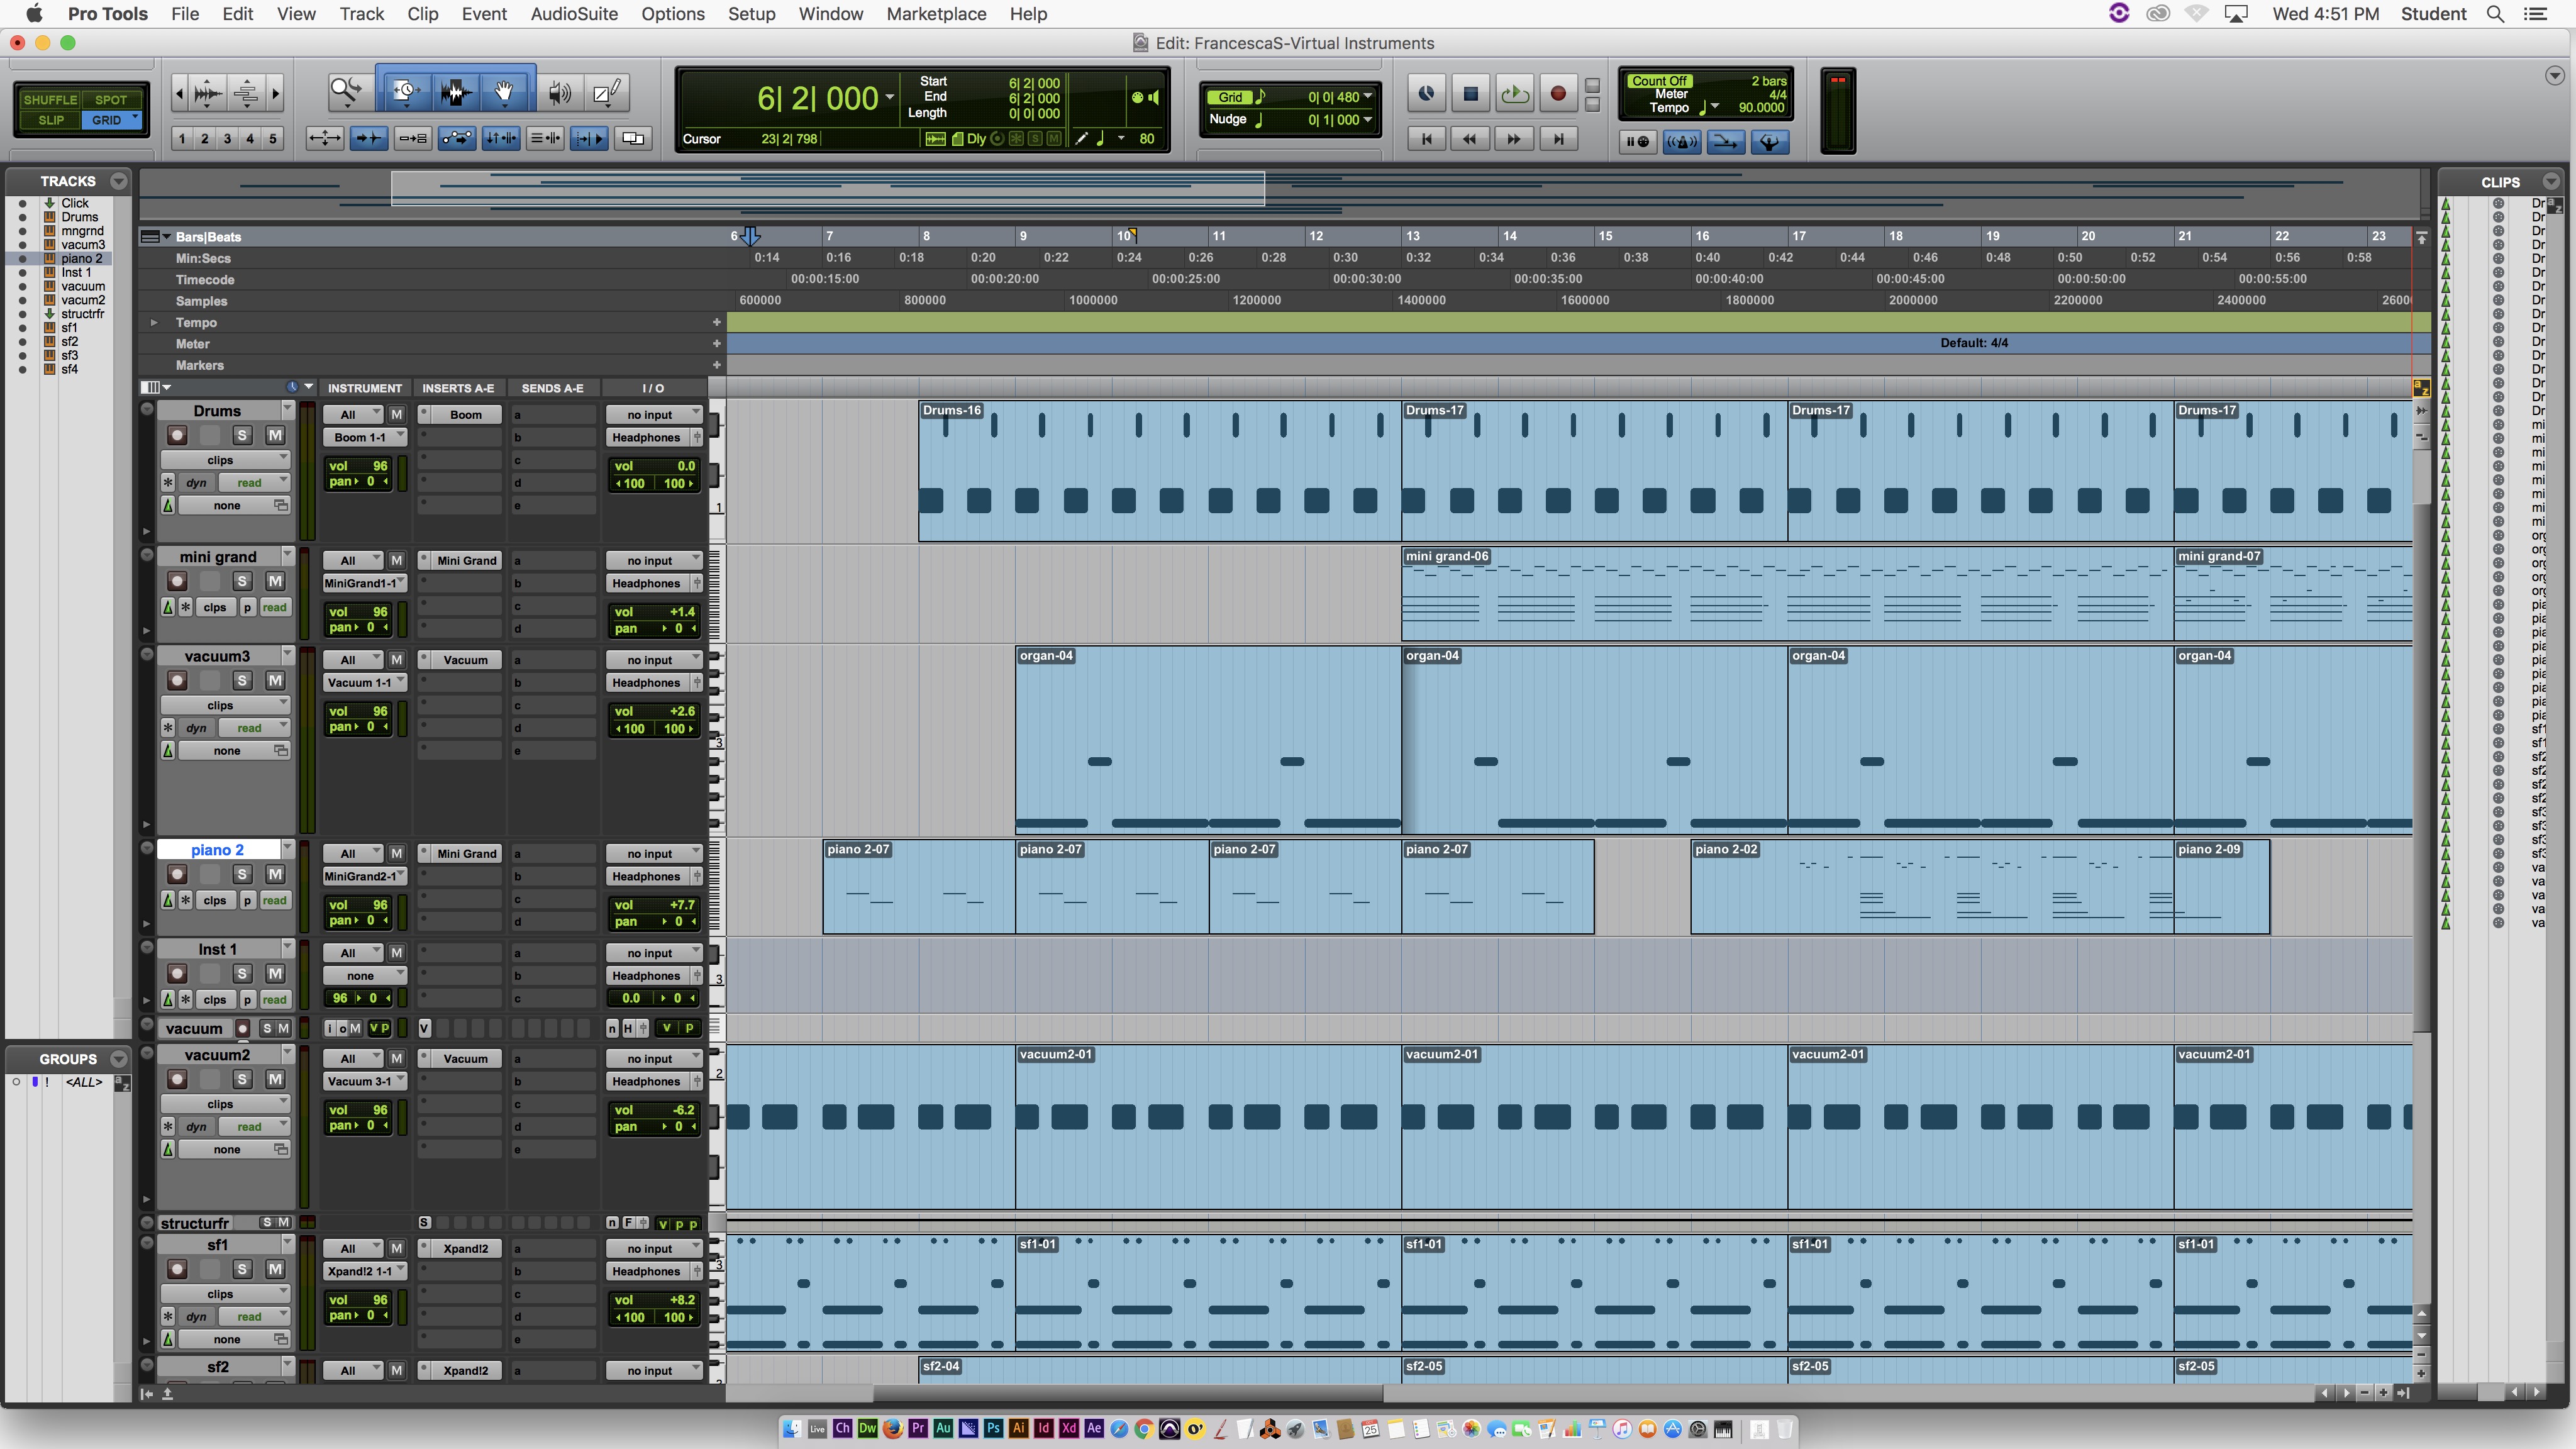 This is a screenshot of ProTools which I used to produce the experimental music.